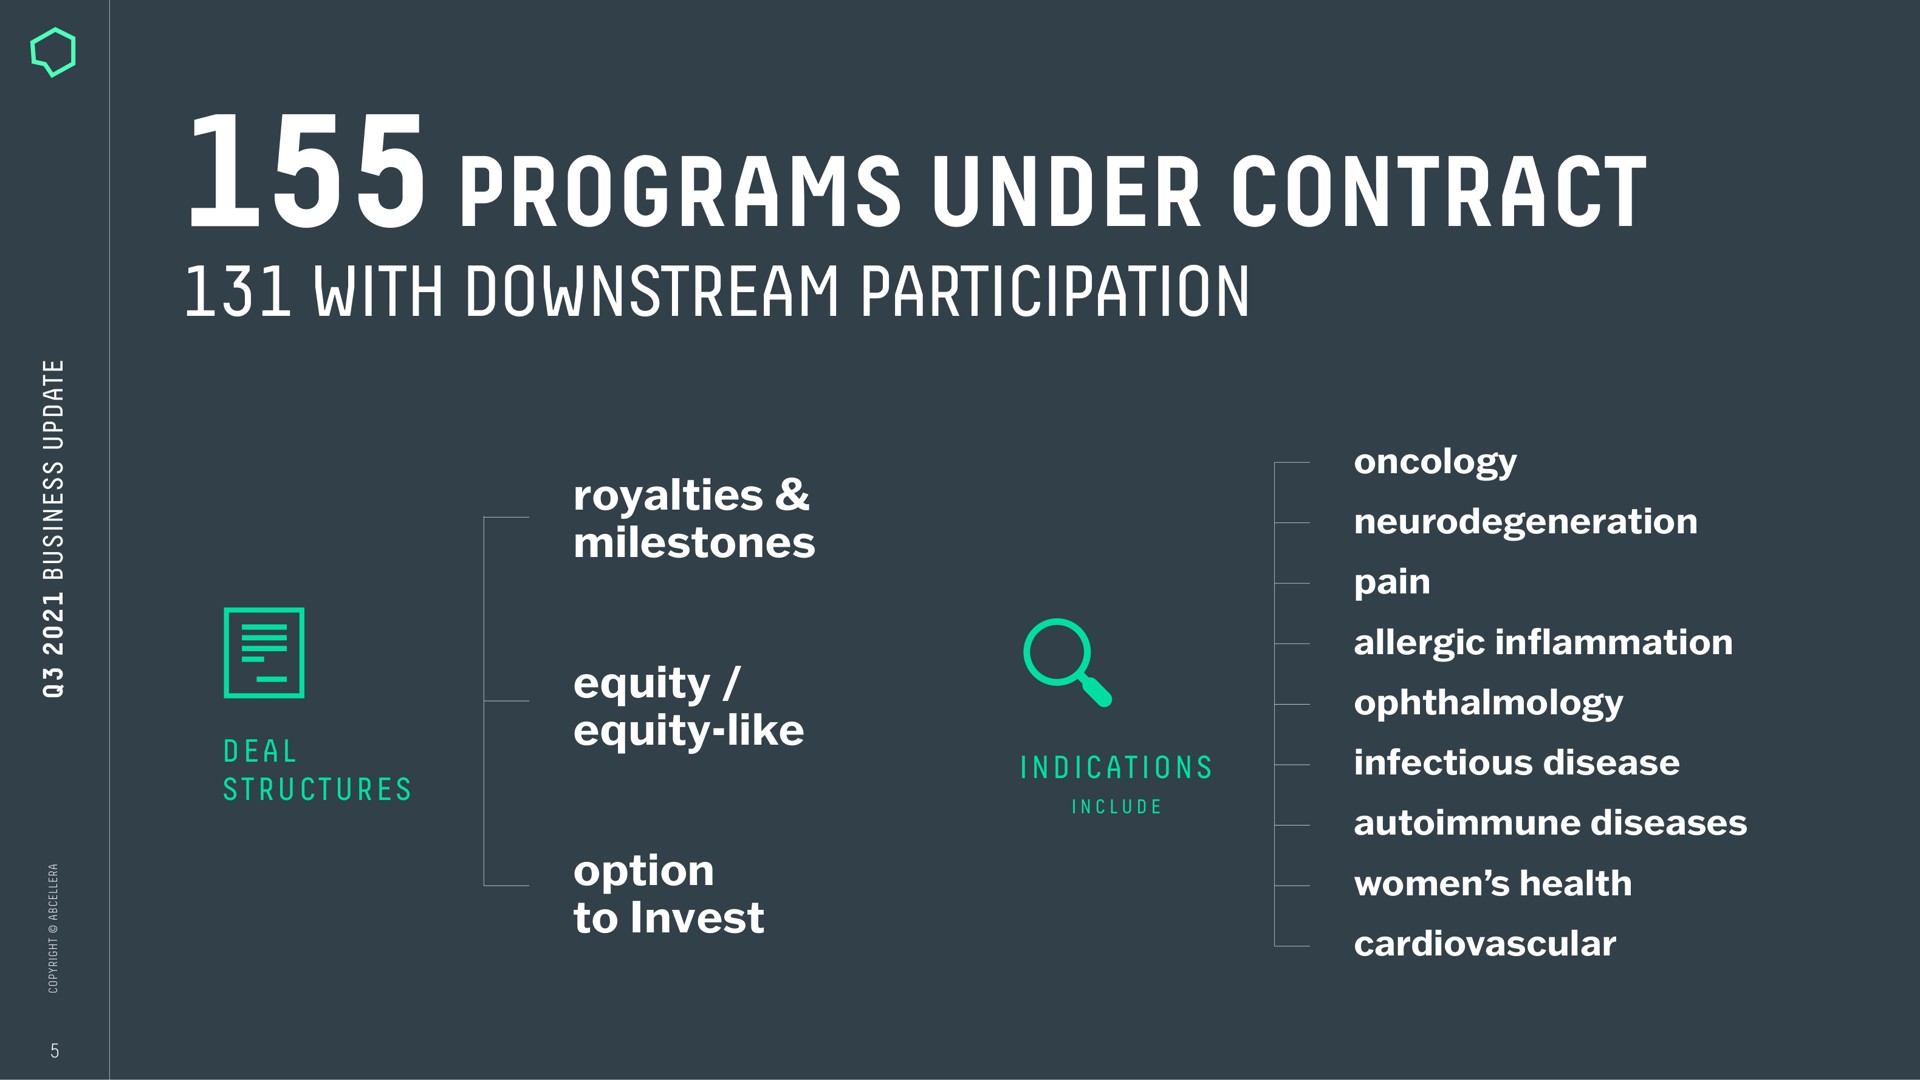 programs under contract with downstream participation | AbCellera